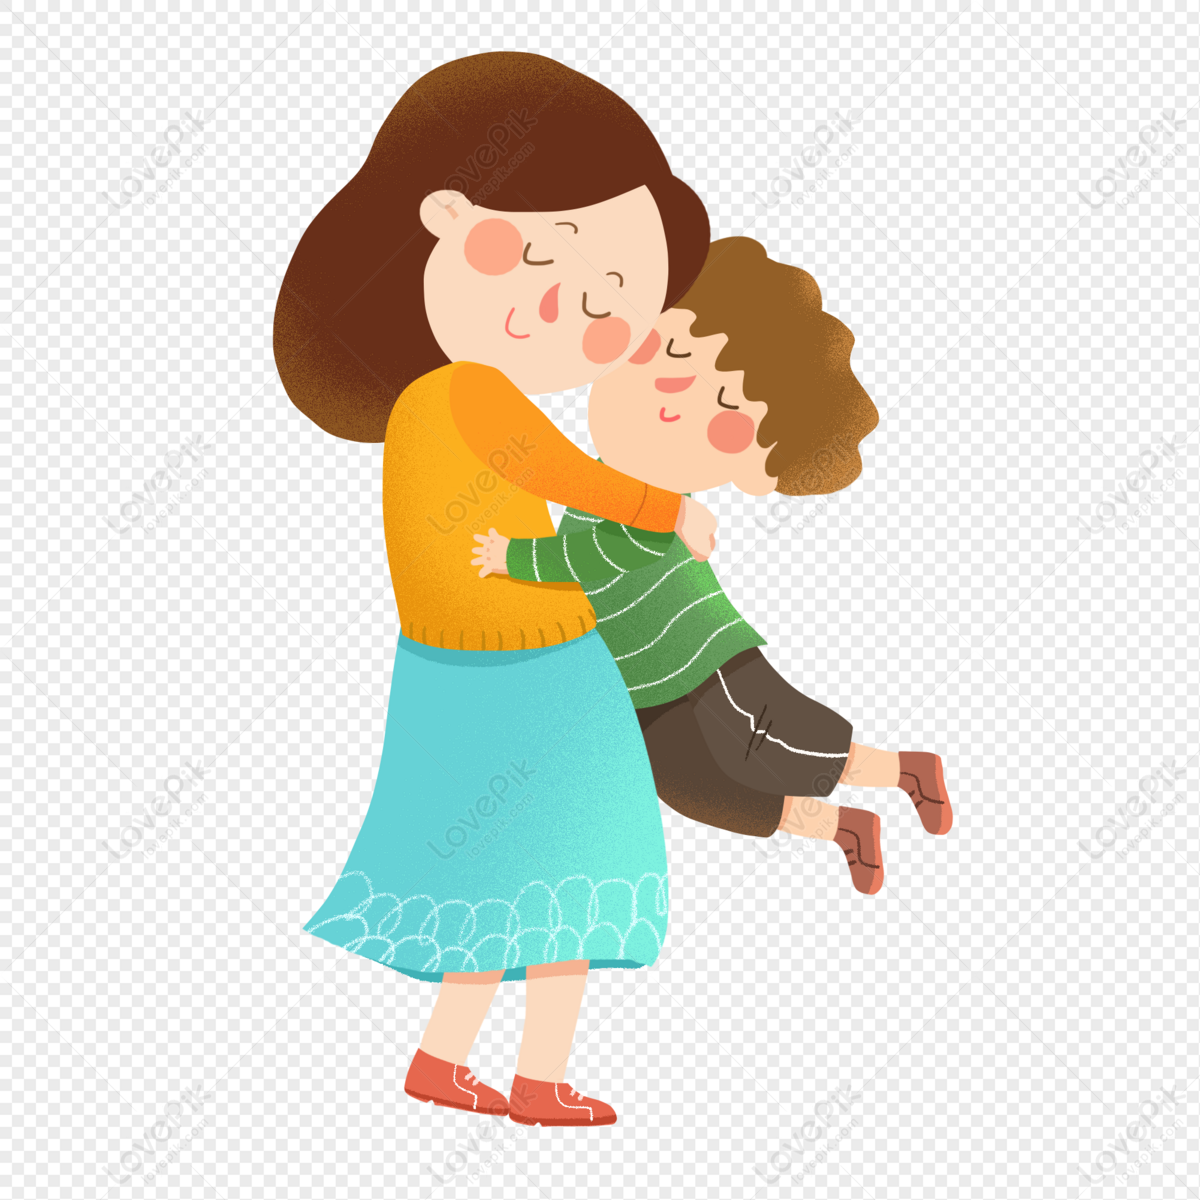 Hug Day PNG Images With Transparent Background | Free Download On Lovepik